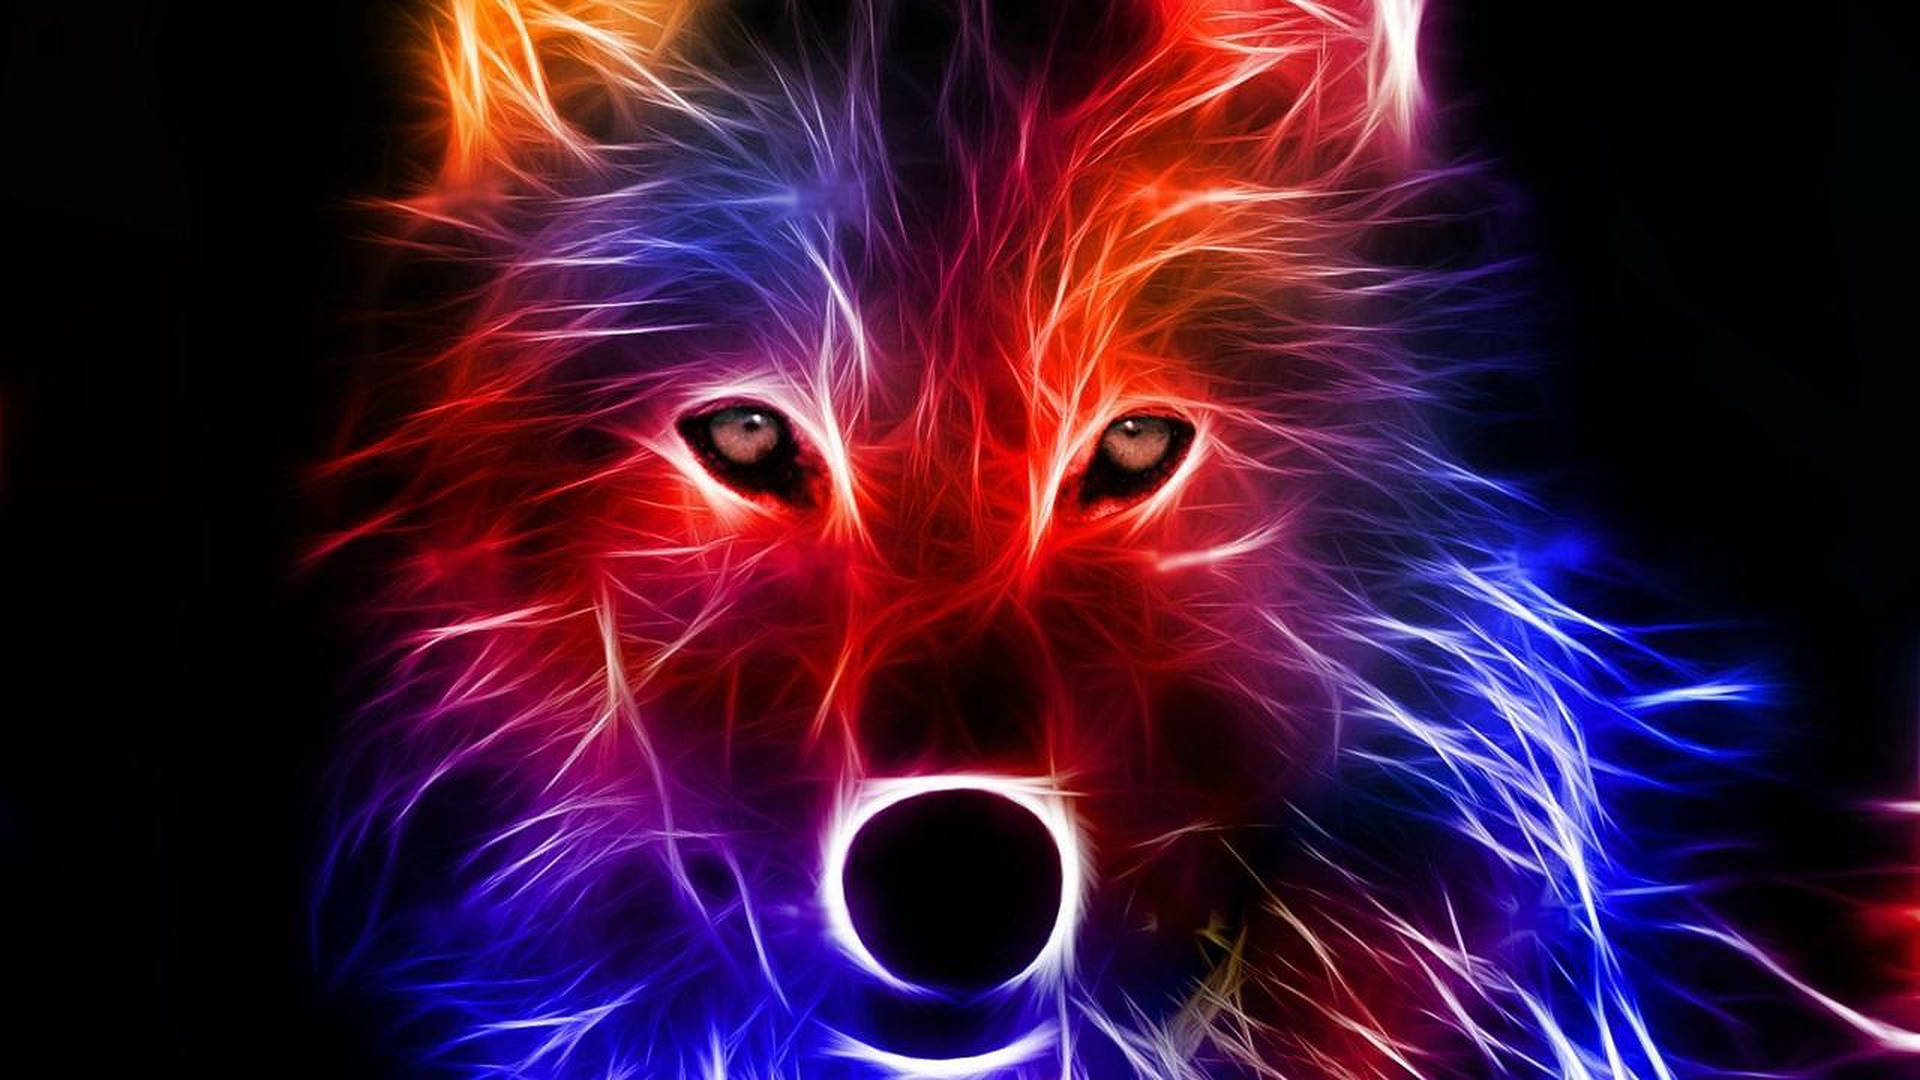 Wild Animal Red And Blue Art